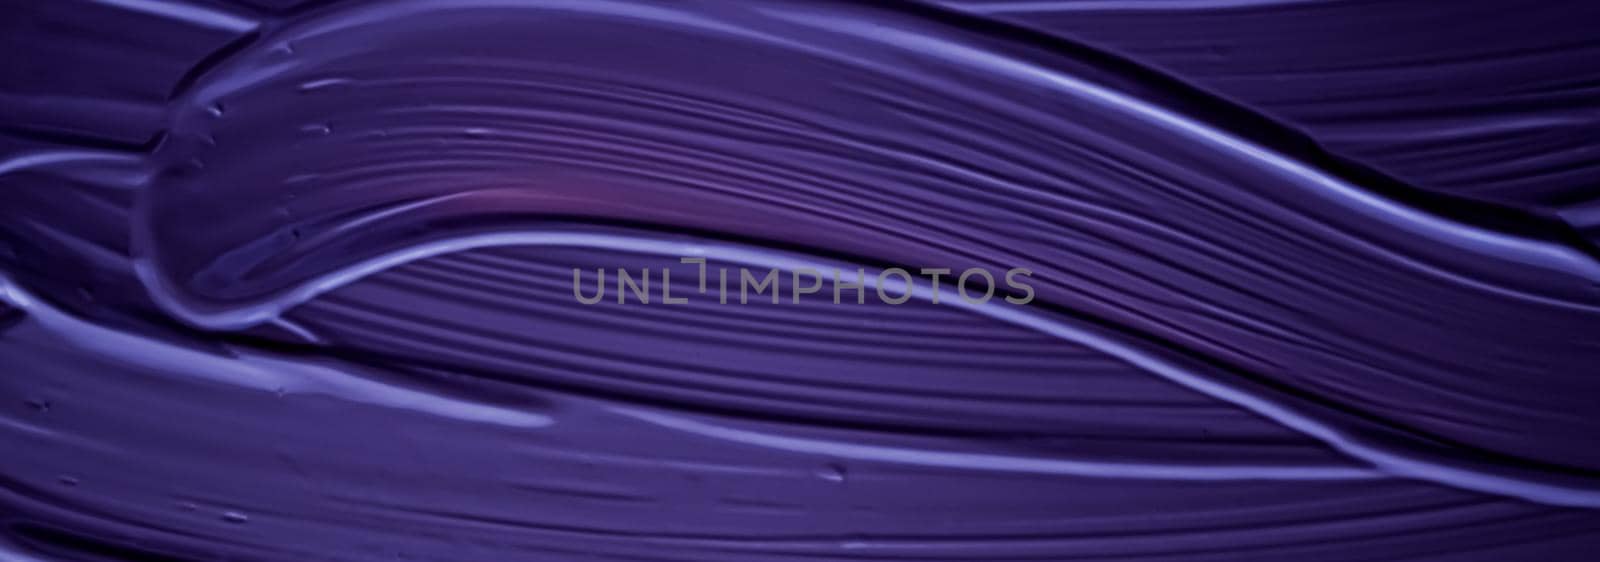 Purple cream texture background, cosmetic product and makeup backdrop for luxury beauty brand, holiday banner design, abstract wall art or artistic paint brush strokes.